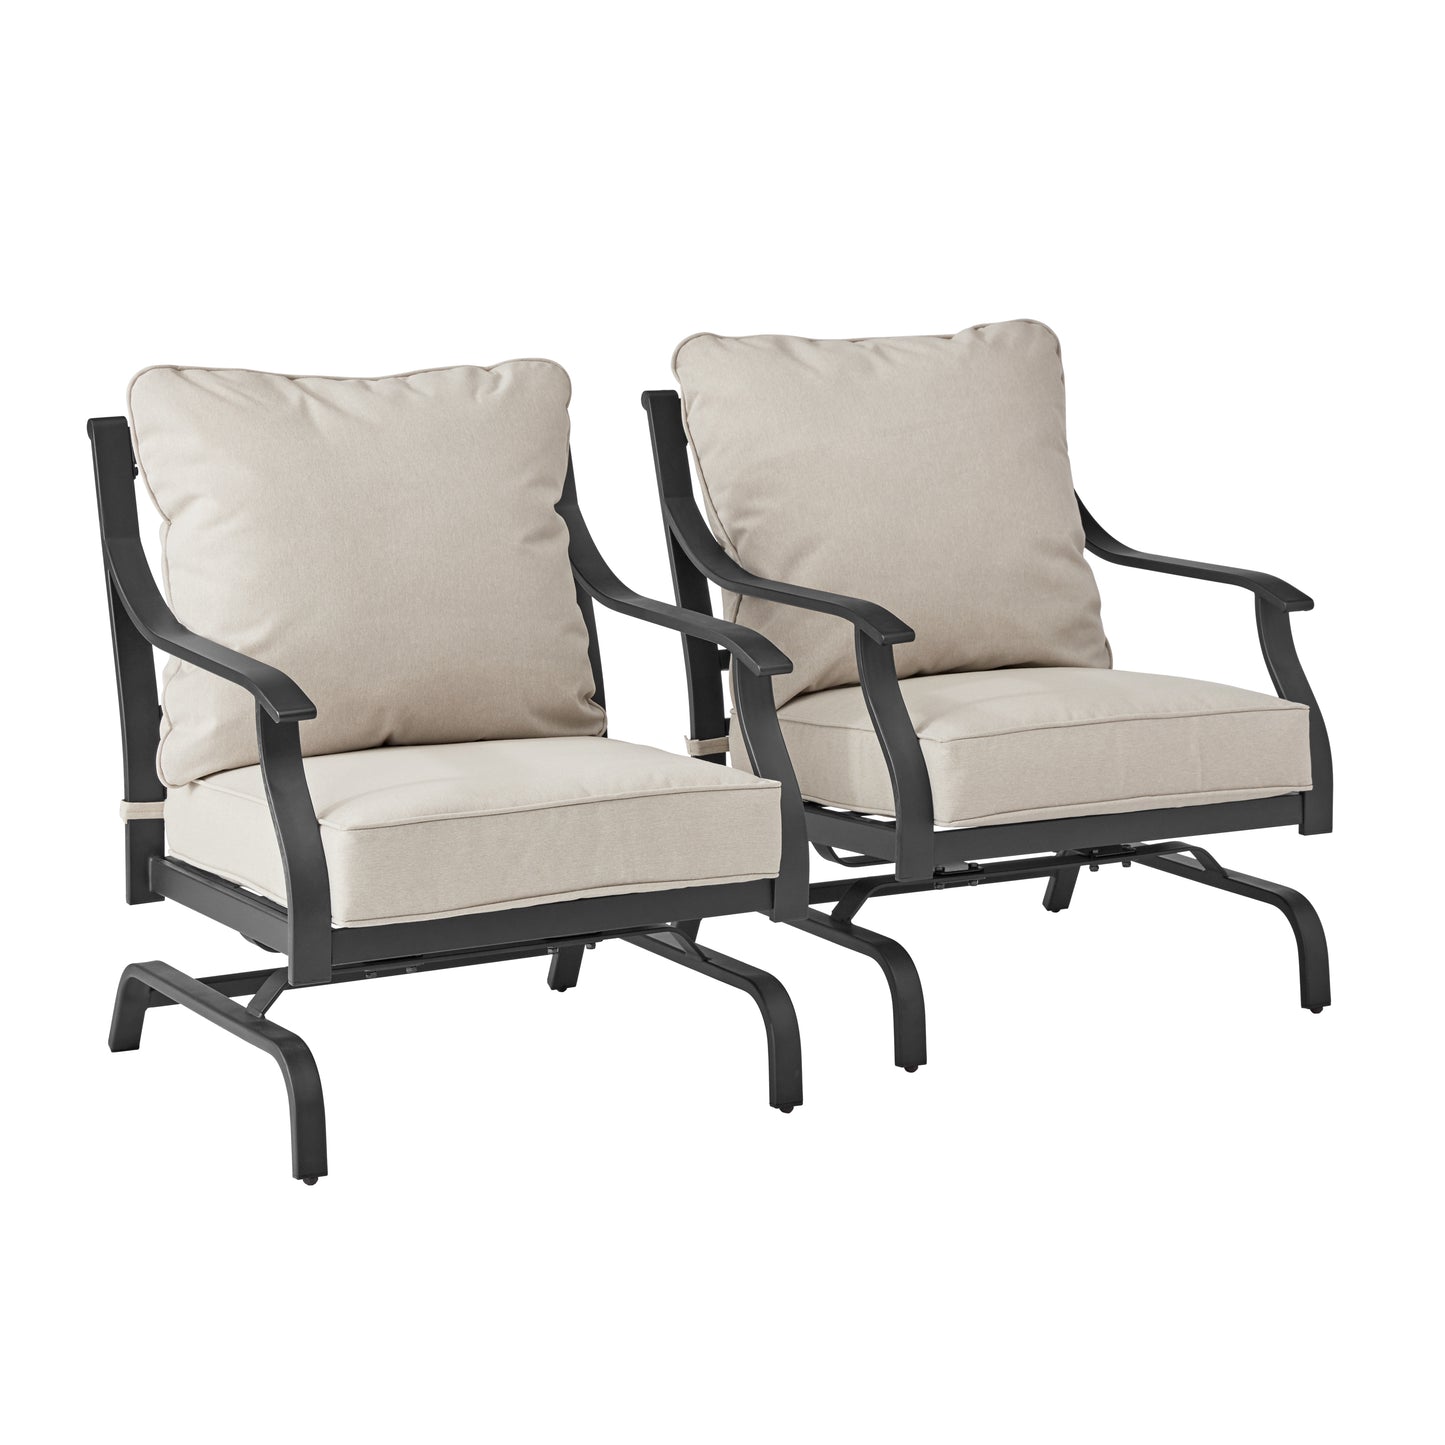 Grand Leisure Newport Deep Seating Outdoor Stationary Rocking Chairs, Set of 2 *PICKUP ONLY*